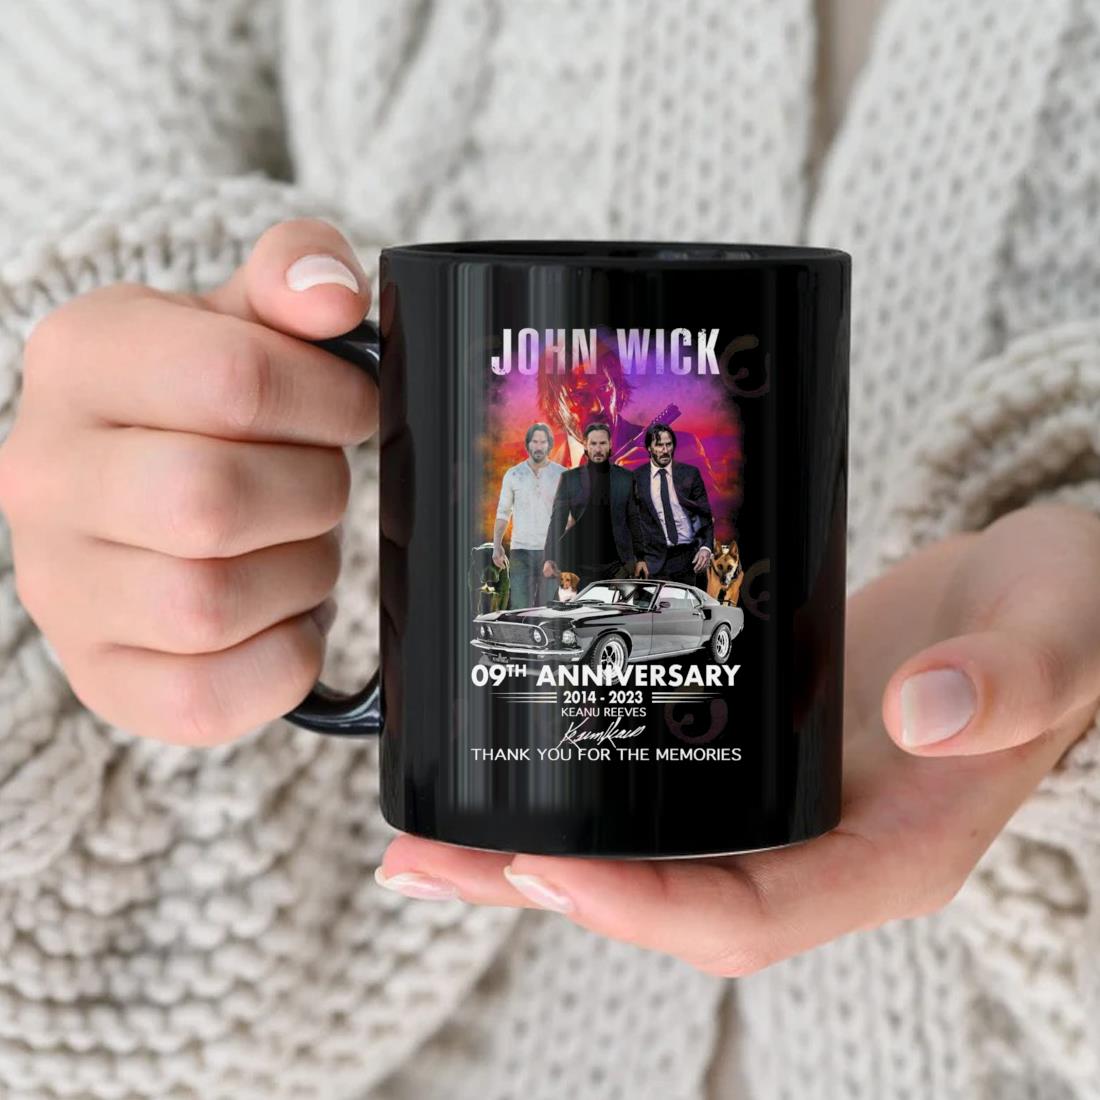 Offiial John Wick 09th Anniversary 2014 – 2023 Keanu Reeves Thank You For The Memories Signature Mug